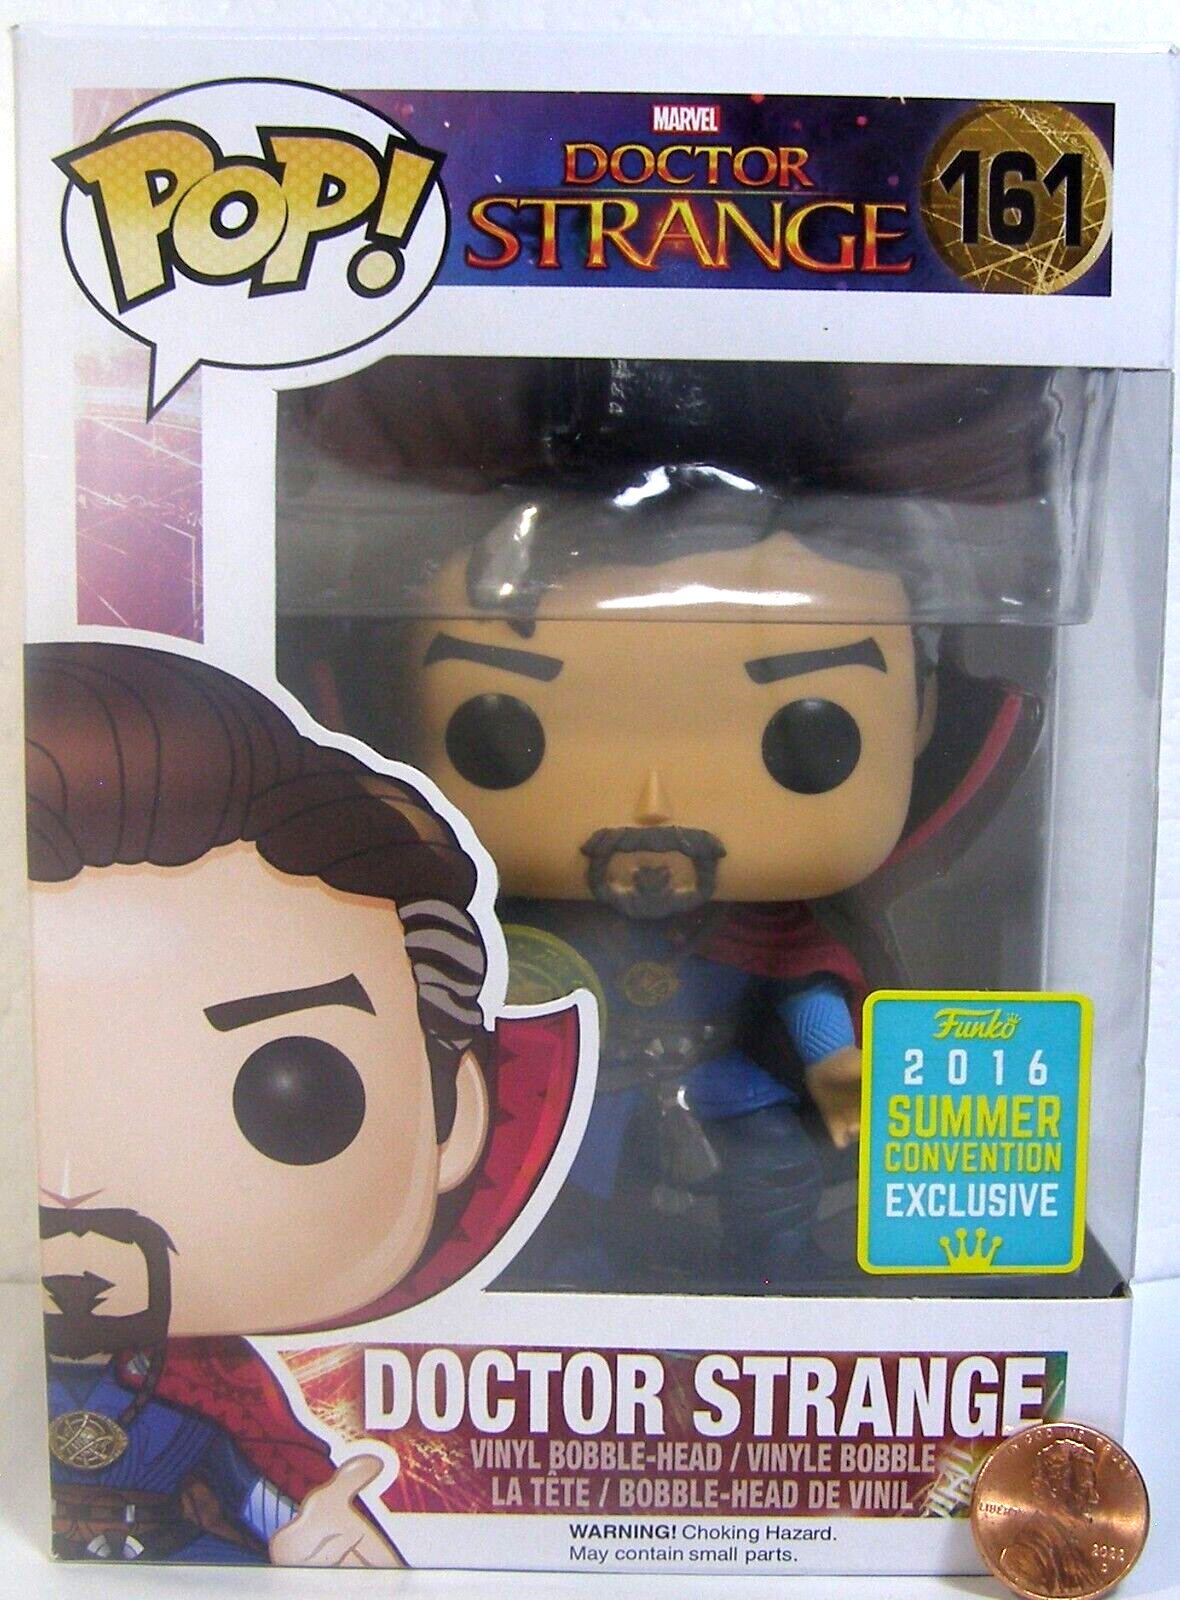 Primary image for Funco Pops! Marvel Doctor Strange #161 2016 Exclusive Summer Convention SCL